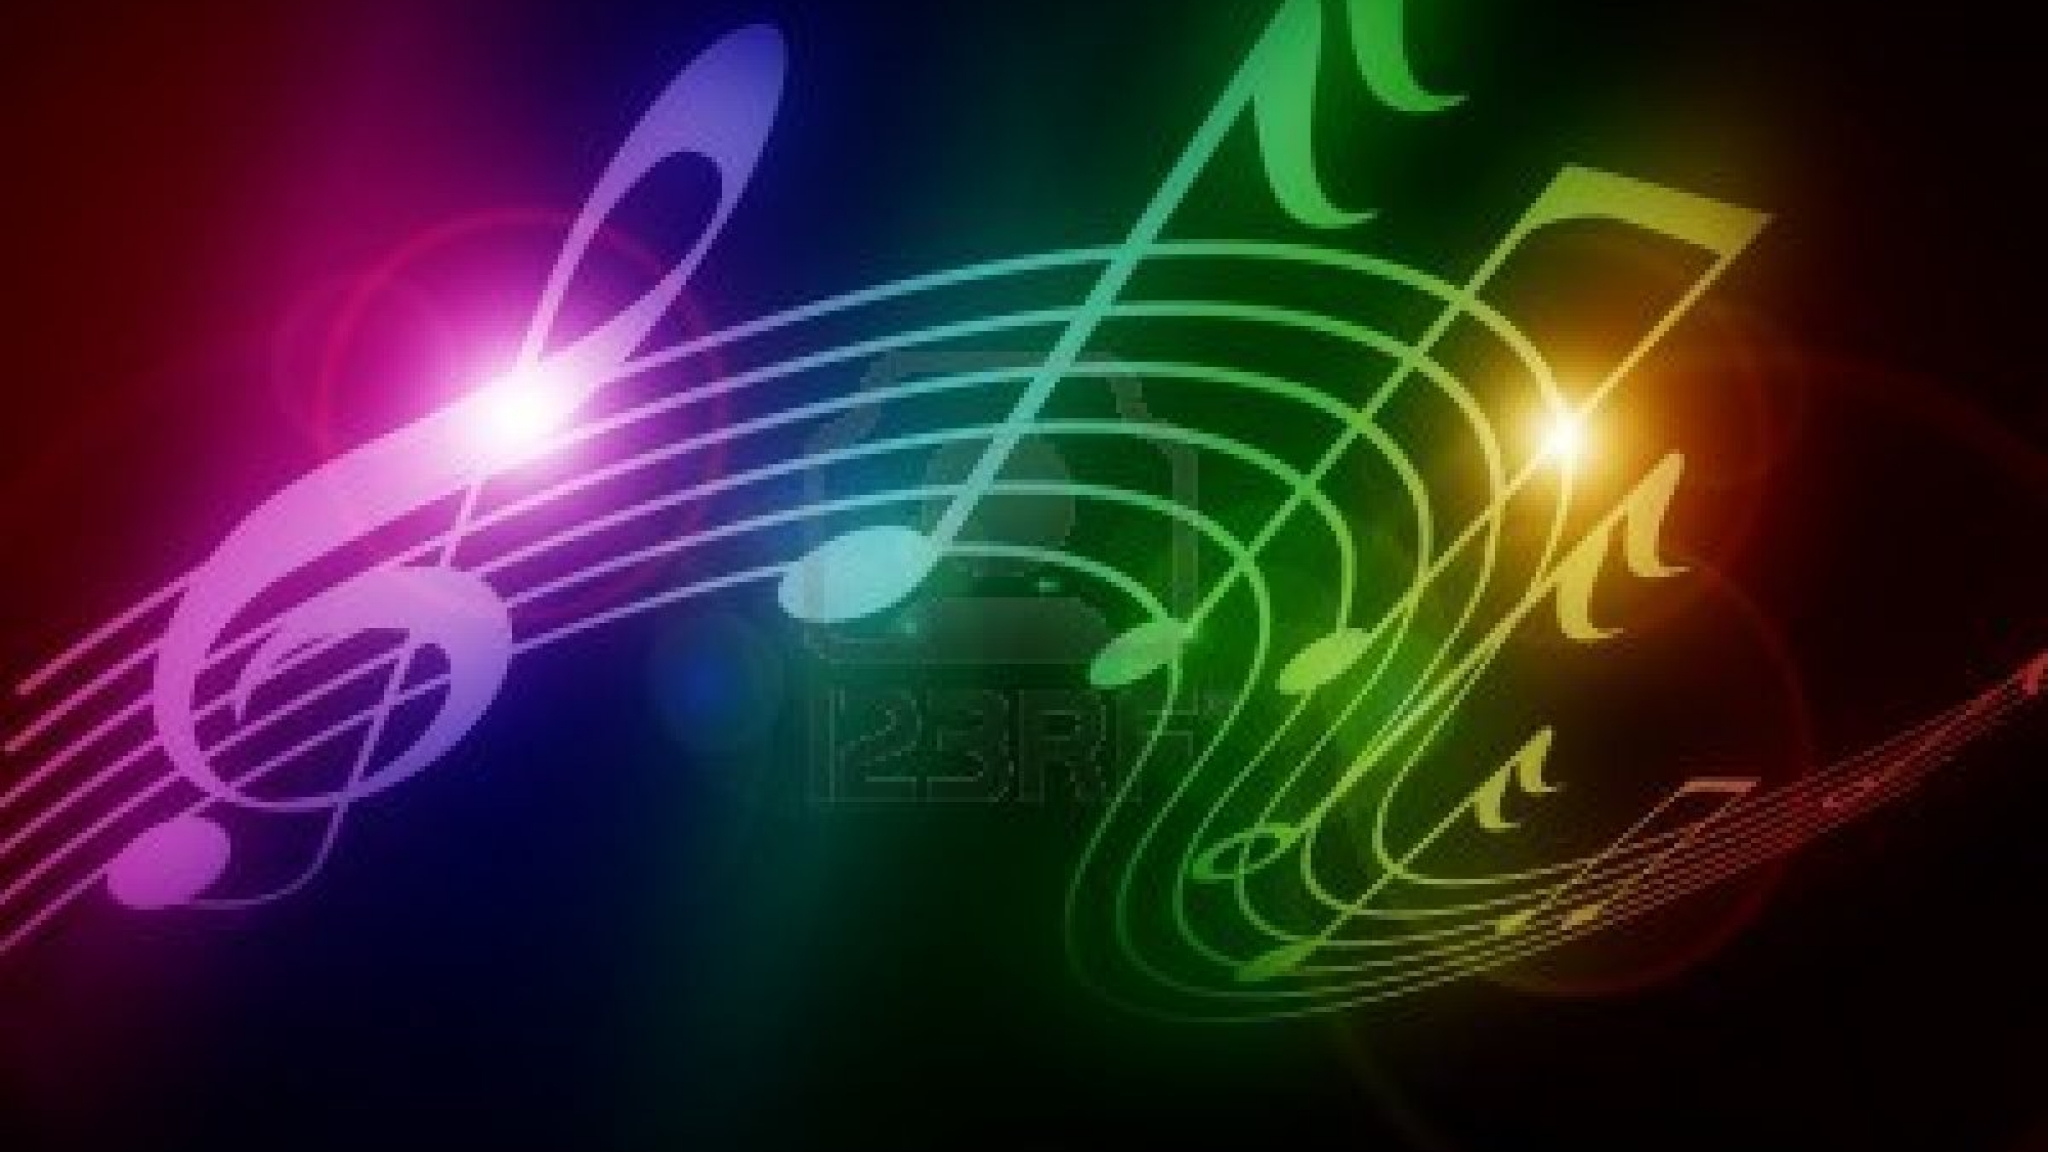 colorful music notes 13 1080p hd wallpapers